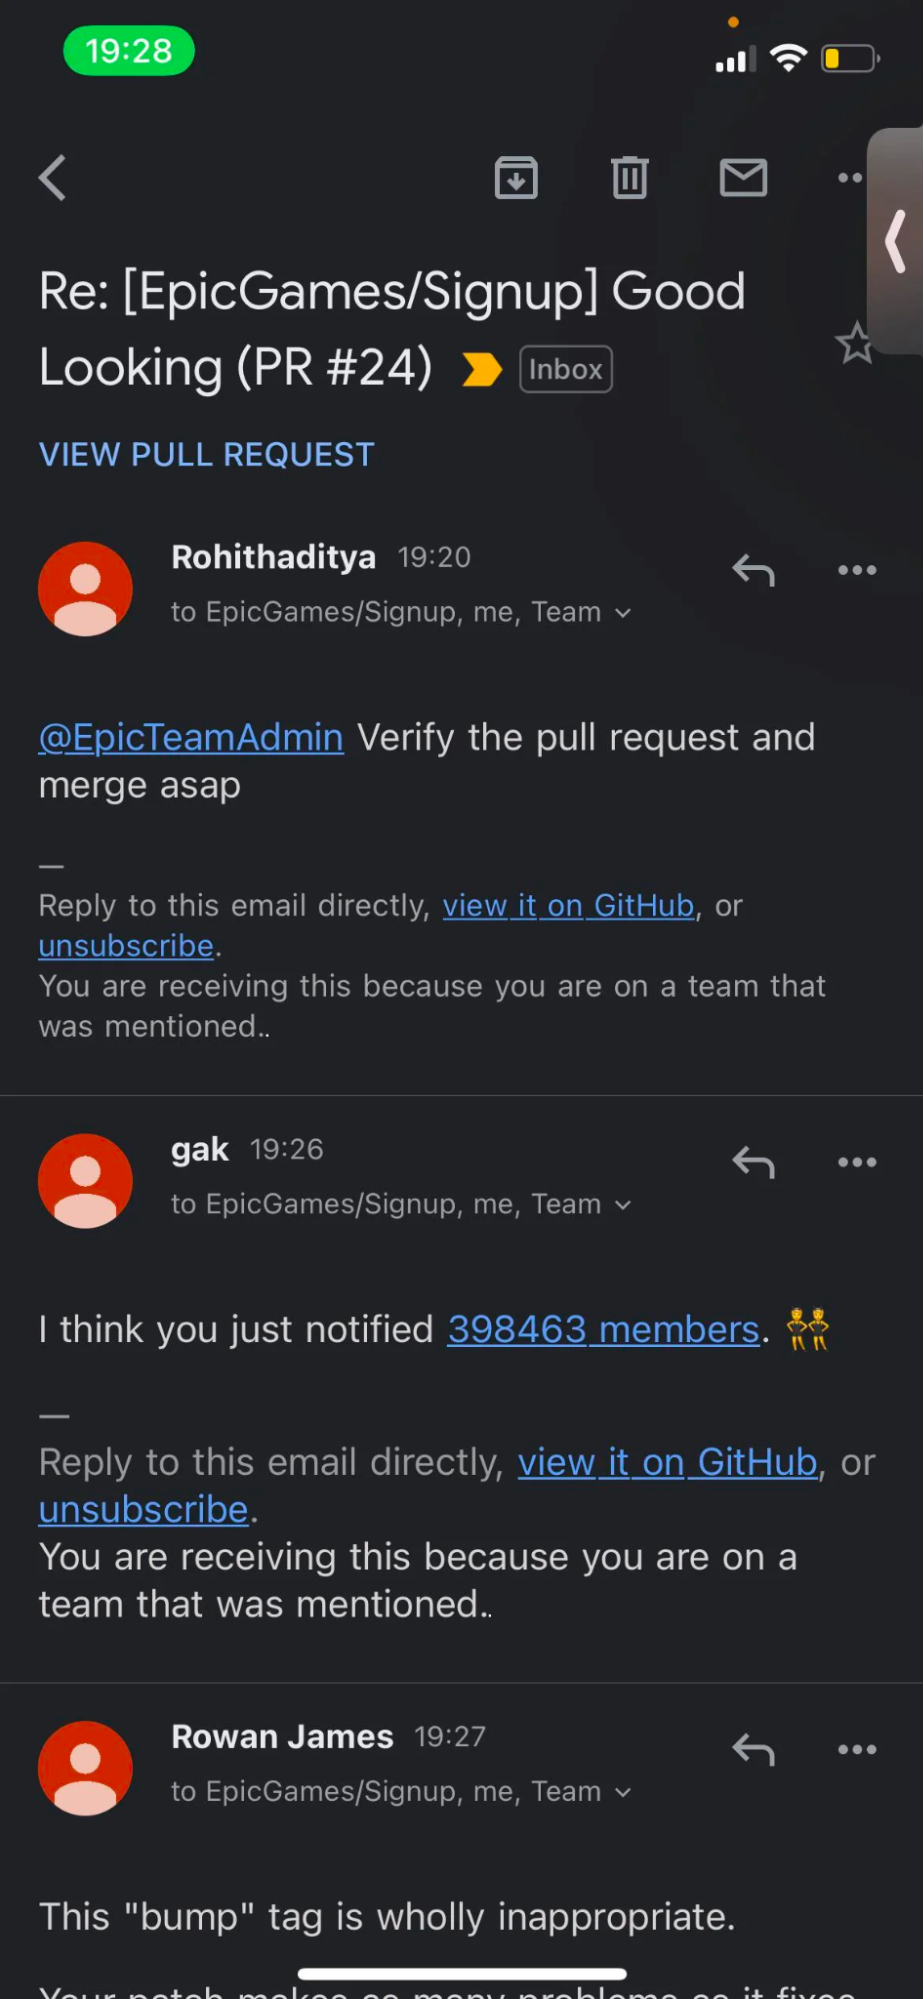 mobile shot of inbox feed with messages verifying pull request and merge with a response that gak notified 398,463 members